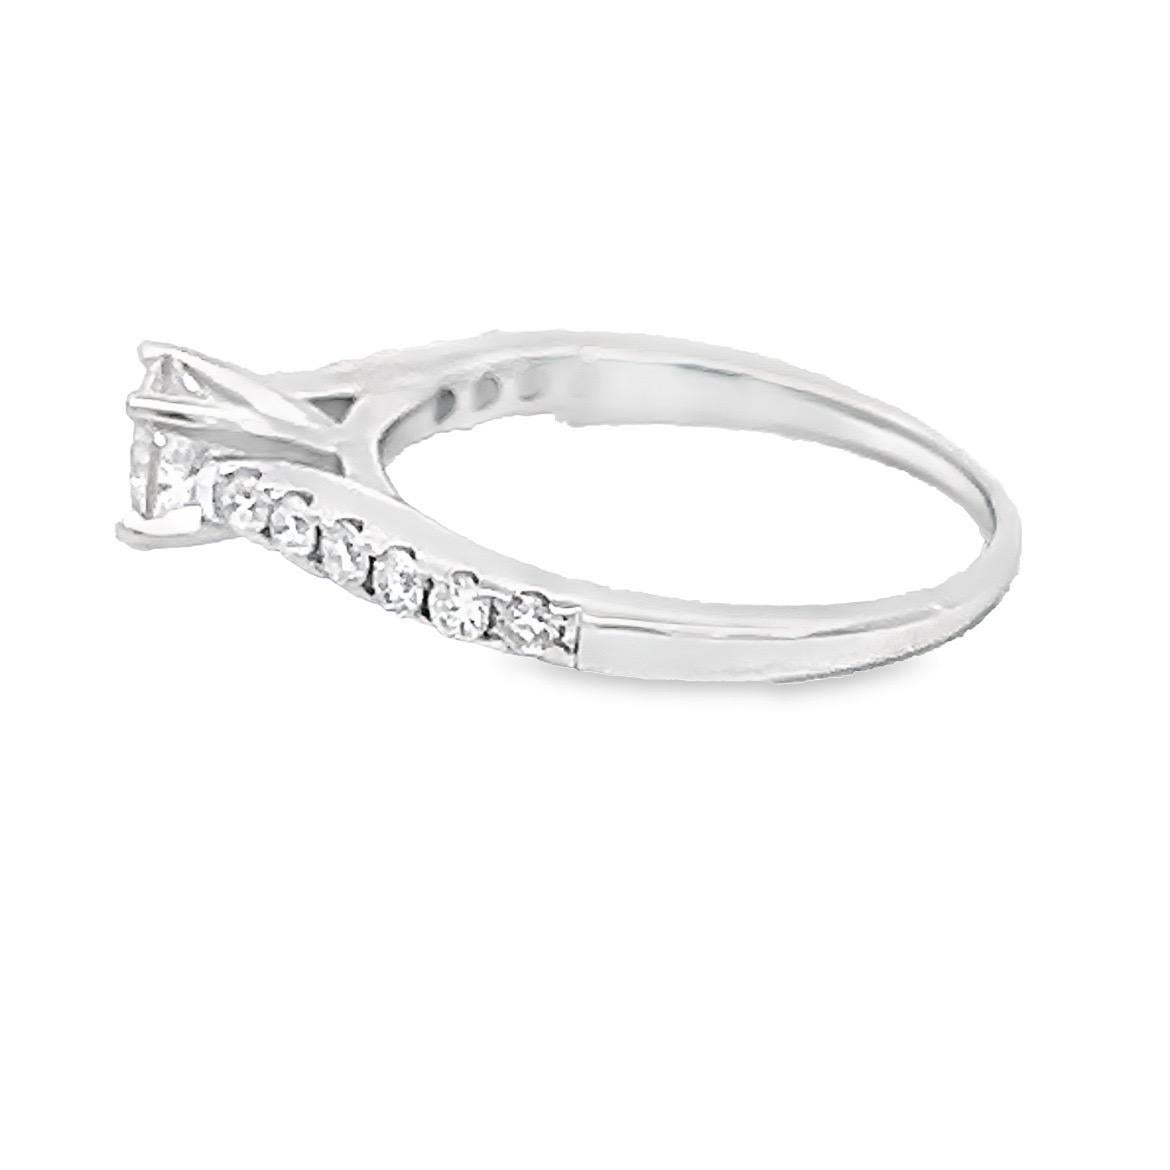 Solitaire Diamond Engagement Ring
Natural Full Brilliant Cut Diamonds 
14k White Gold
4 prongs setting
Number of Diamonds: 13
Total Diamonds Weight: 0.82 CT (including center stone)
Diamond Center Stone: 0.57 CT
Diamond’s Color: G/H
Diamond’s